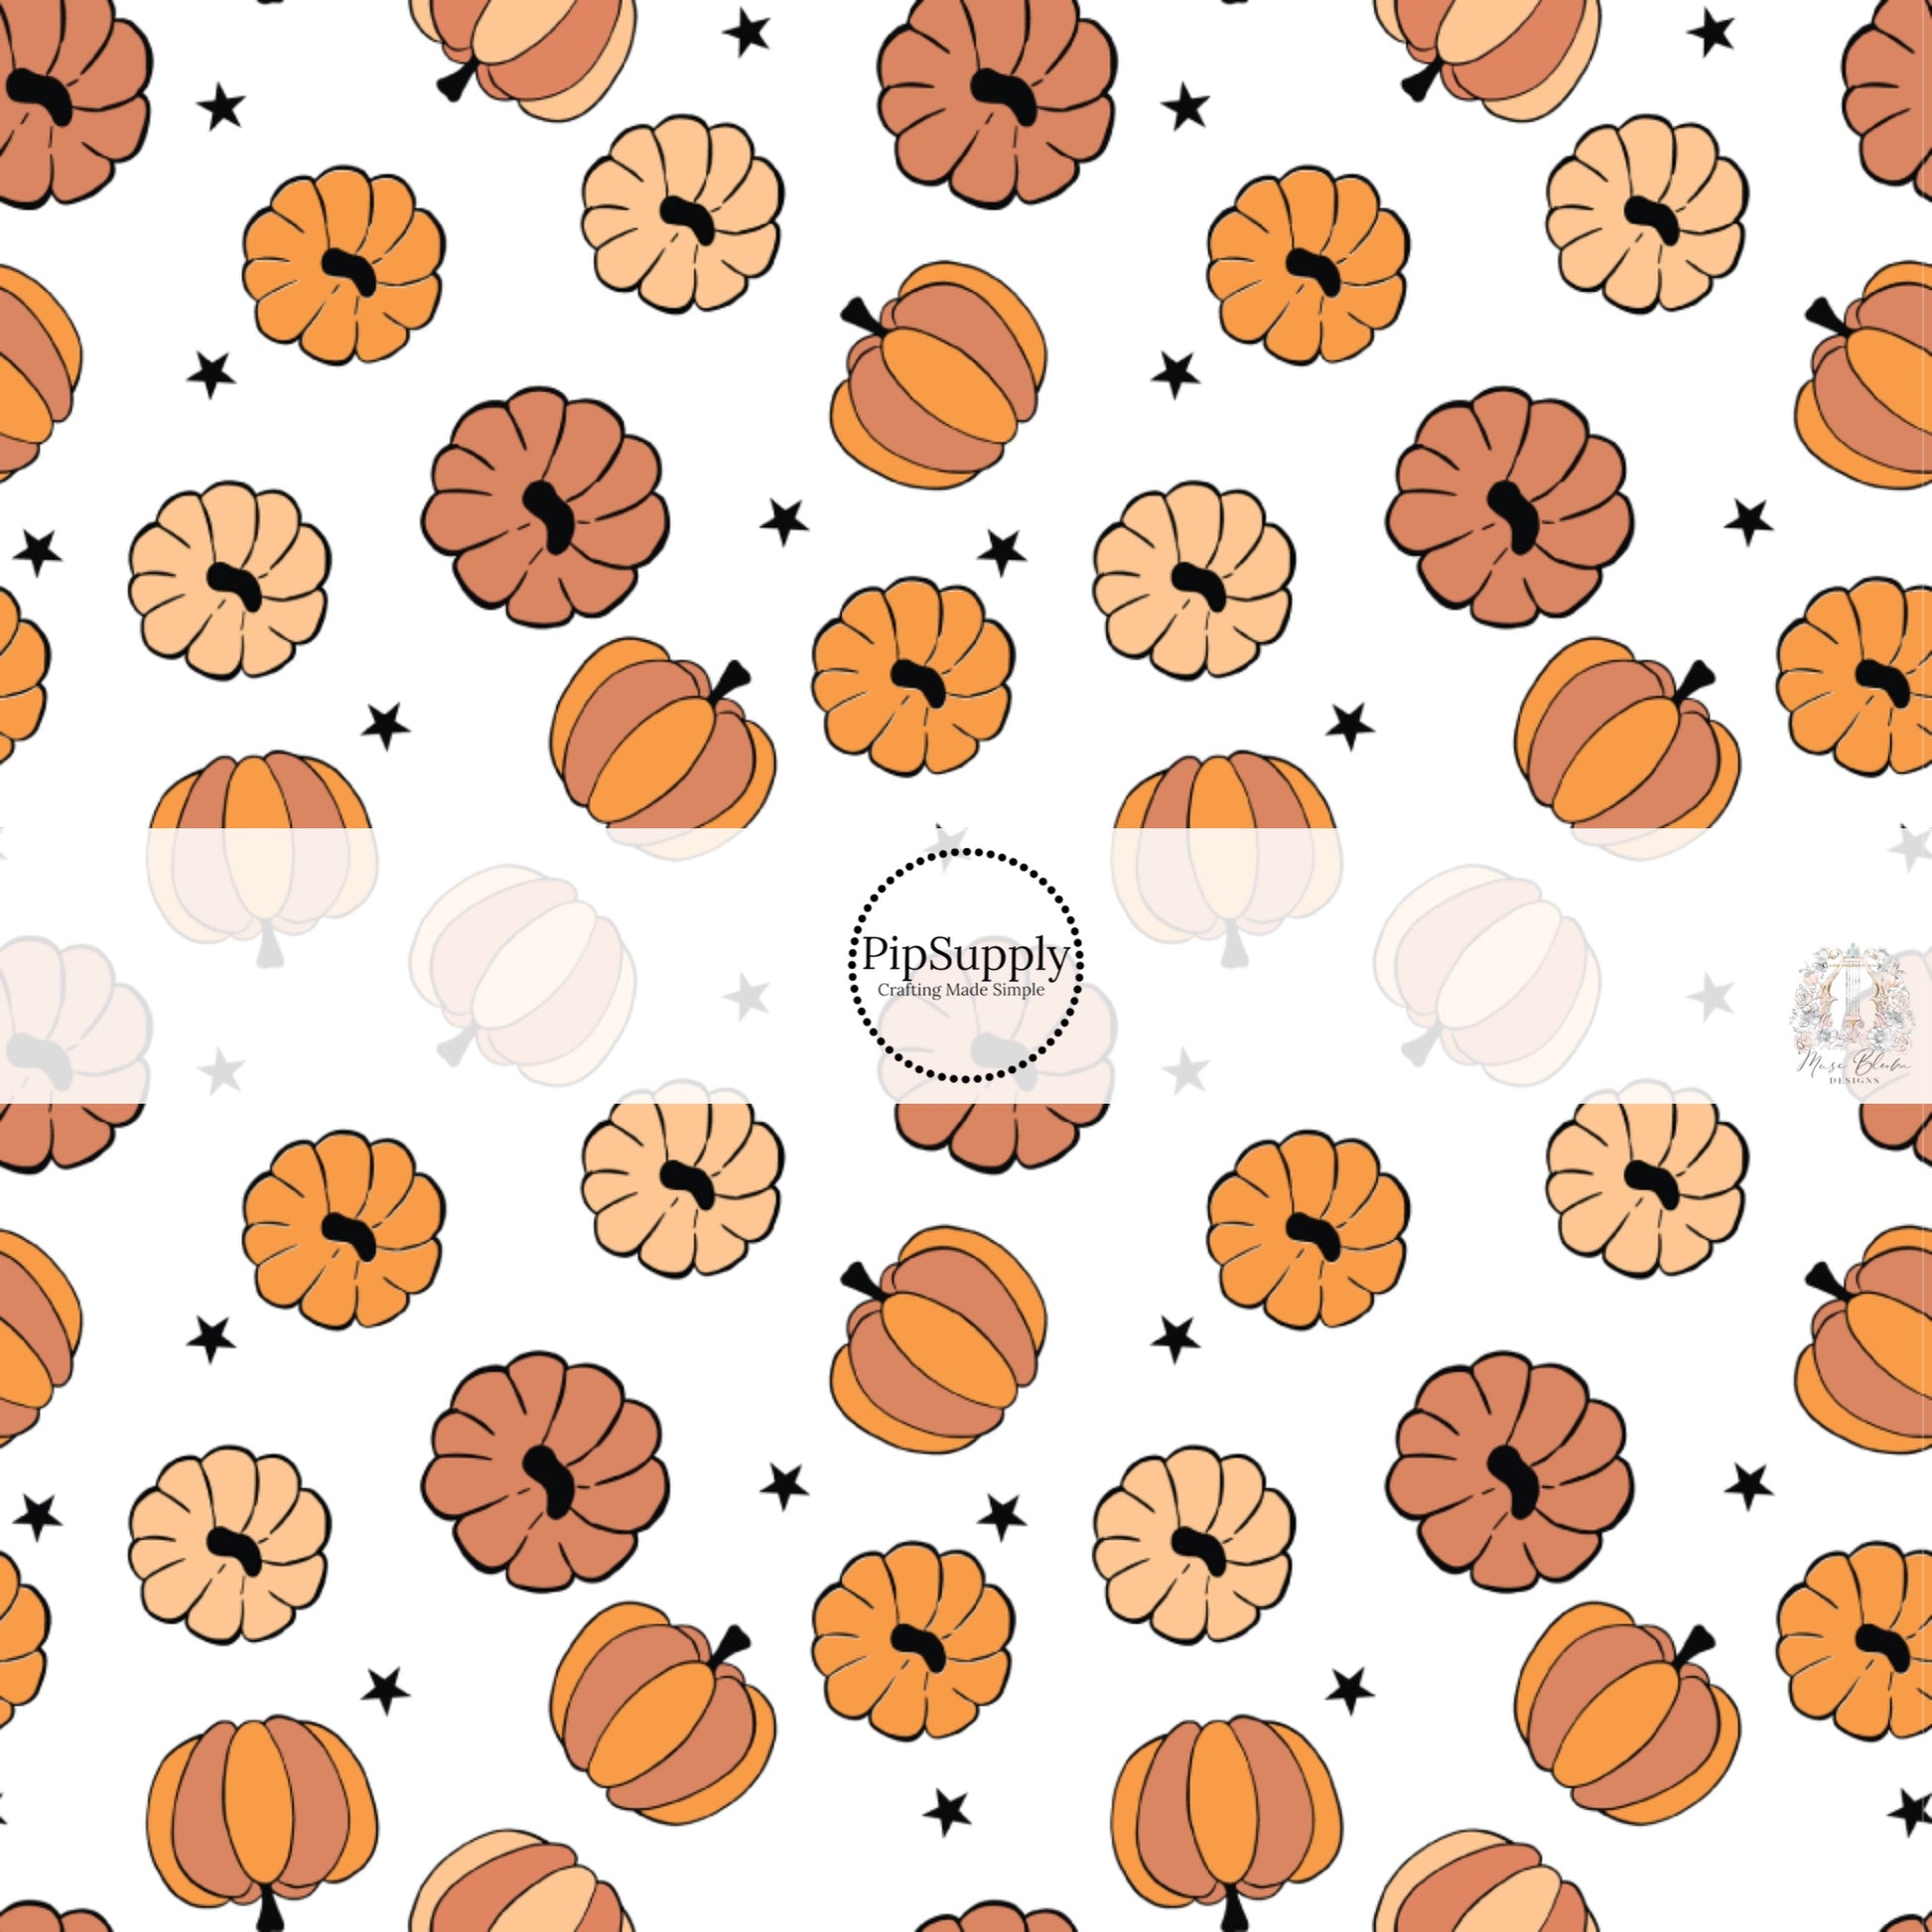 White fabric by the yard with orange colored pumpkins and black stars.